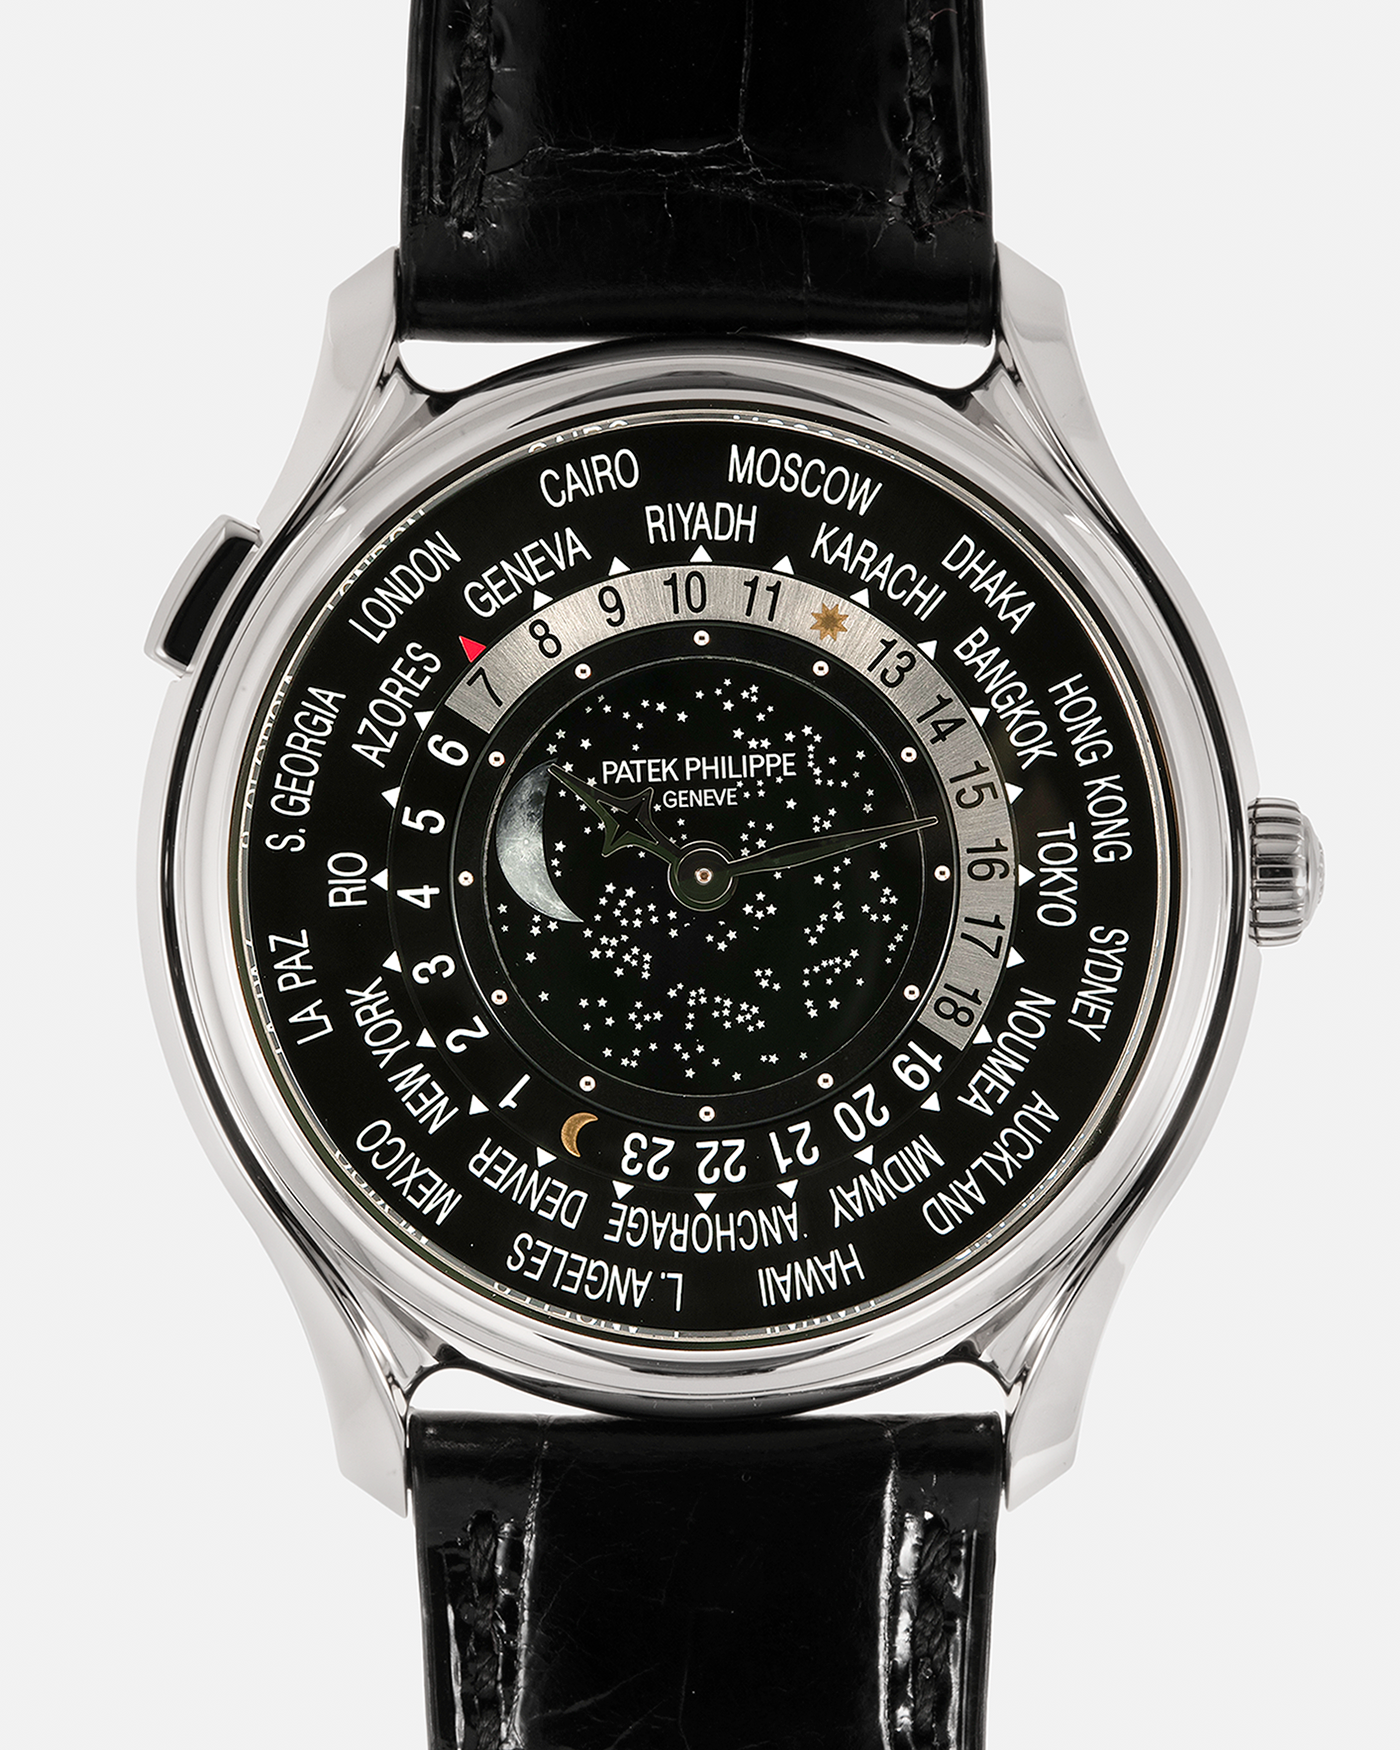 Brand: Patek Philippe Year: 2015 Model: World Time Moon, Limited Edition of 1300 pieces Reference Number: 5575G Material: 18-carat White Gold Movement: Patek Philippe Cal. 240 HU LU Micro-Rotor, Self-Winding Case Diameter: 40mm Lug Width: 20mm Strap: Patek Philippe Black Alligator Leather Strap with Signed / Engraved 18-carat White Gold Deployant Clasp